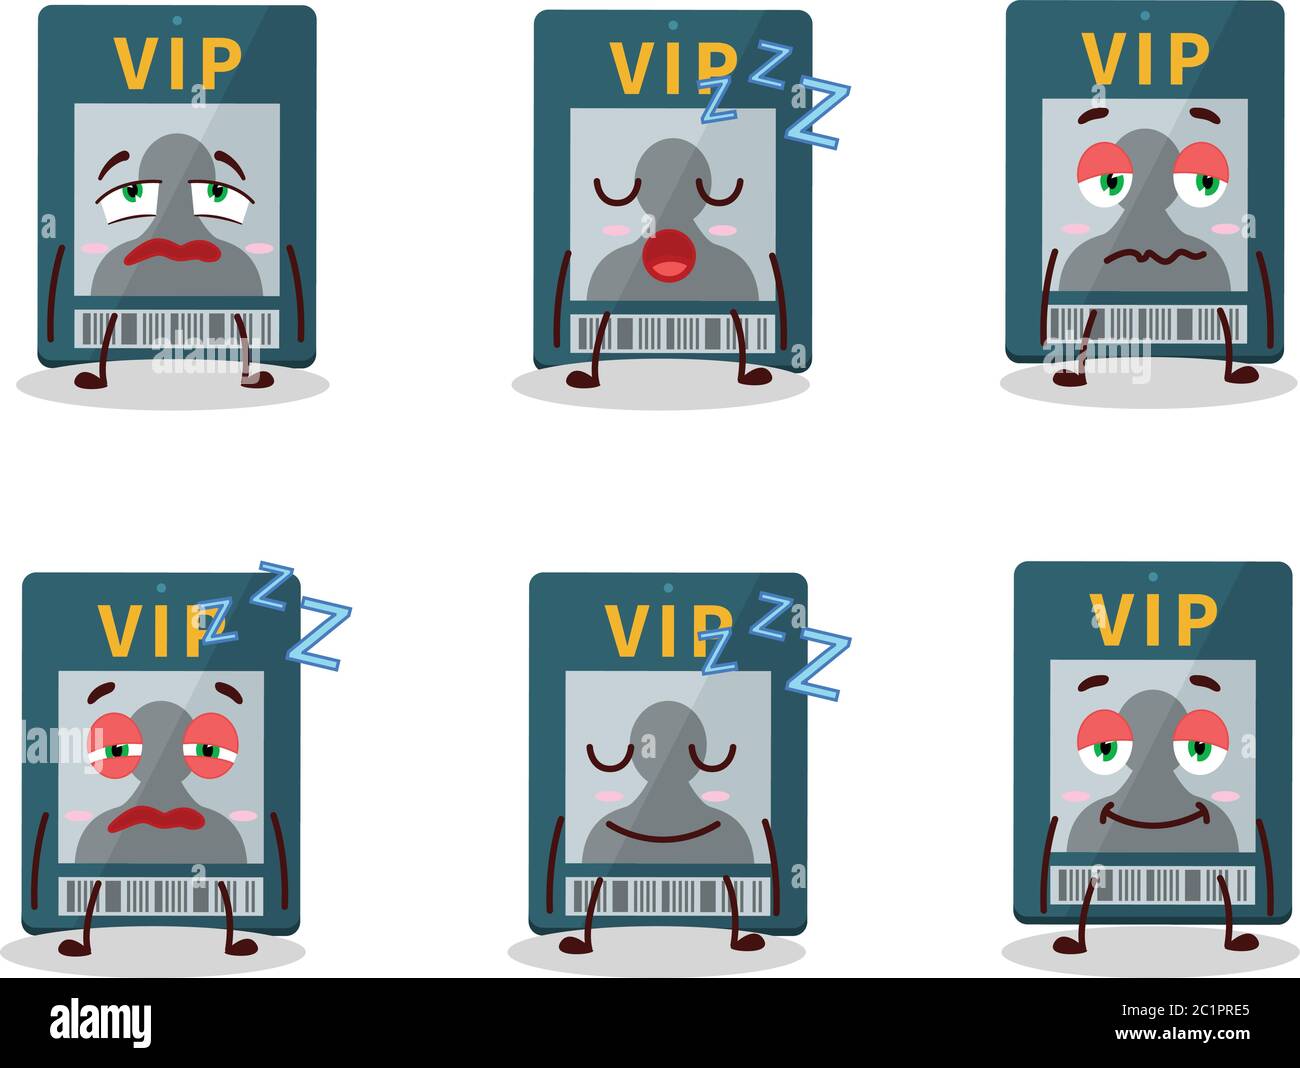 Cartoon character of vip card with sleepy expression Stock Vector